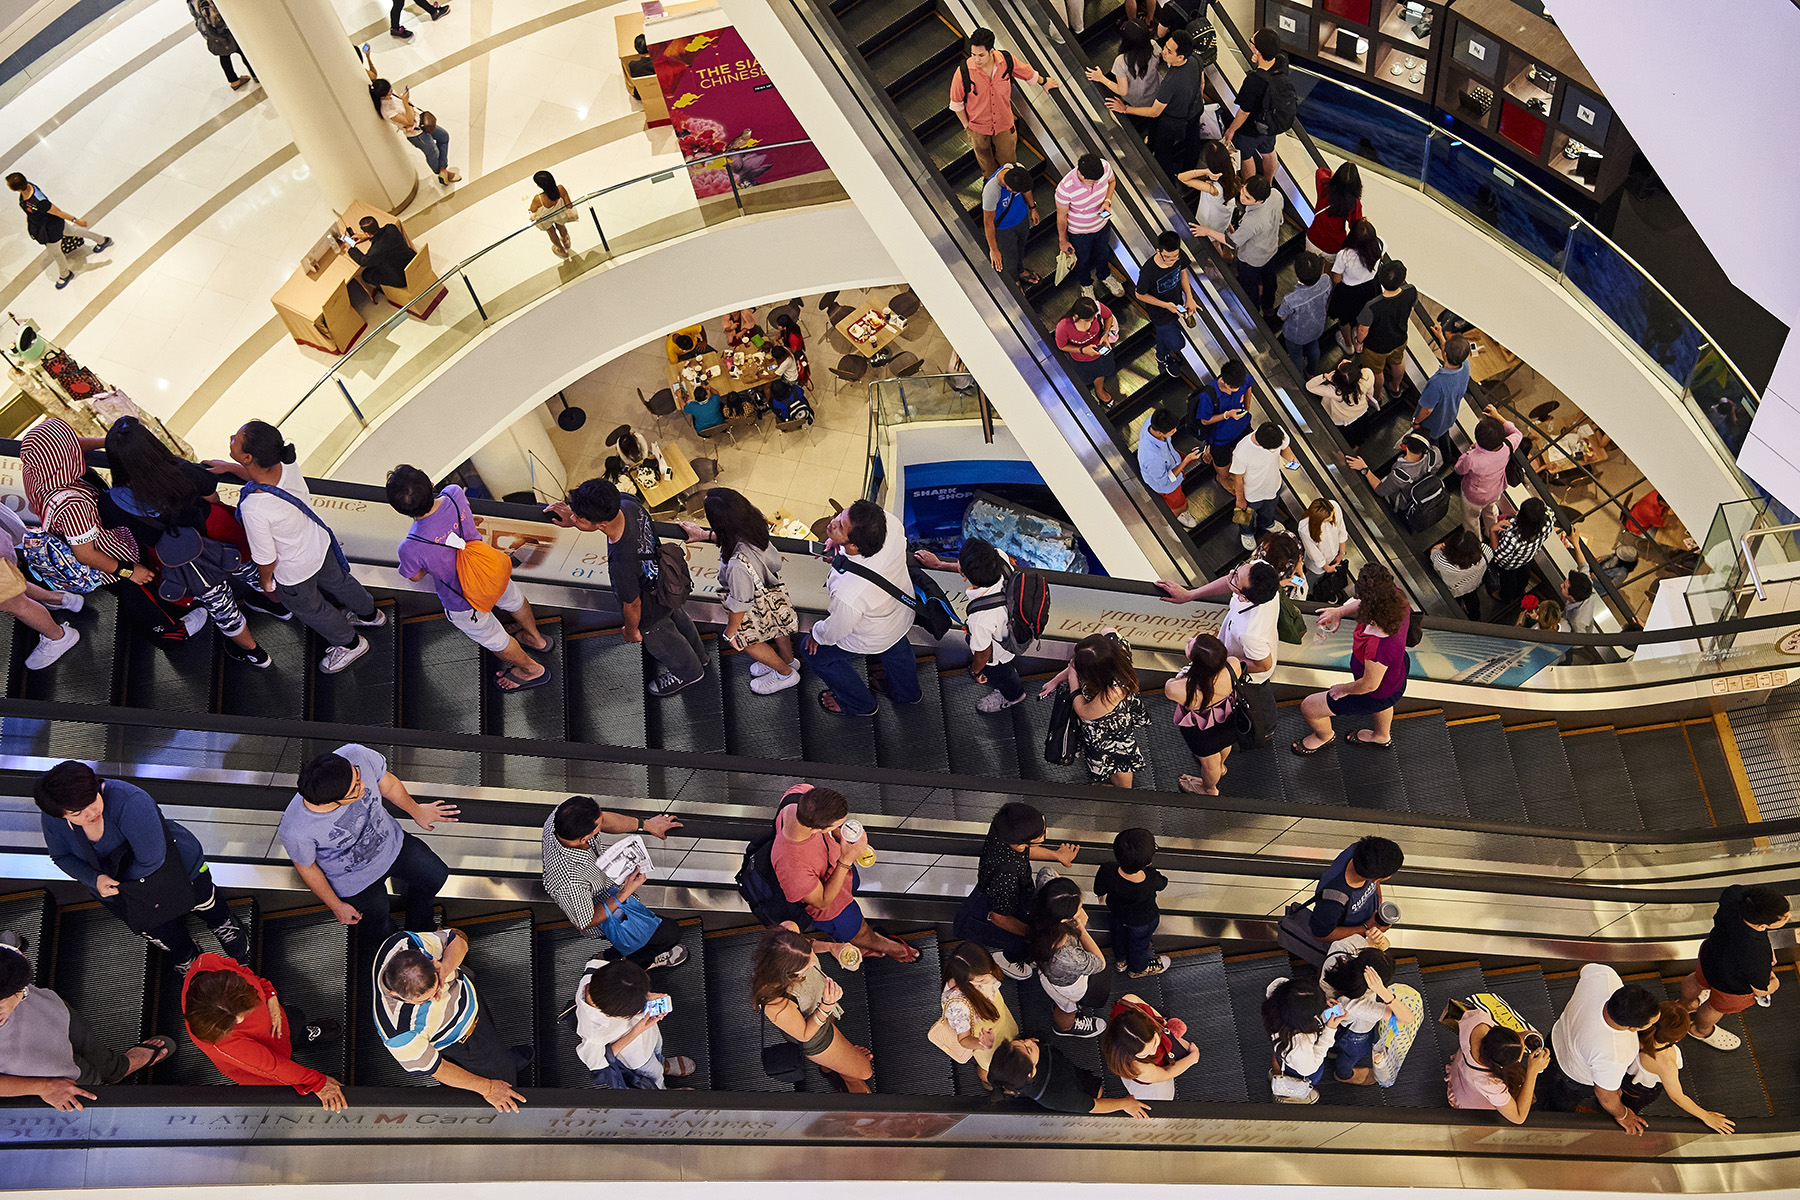 People on escalators in Siam Paragon shopping mall in Bangkok, Thailand

